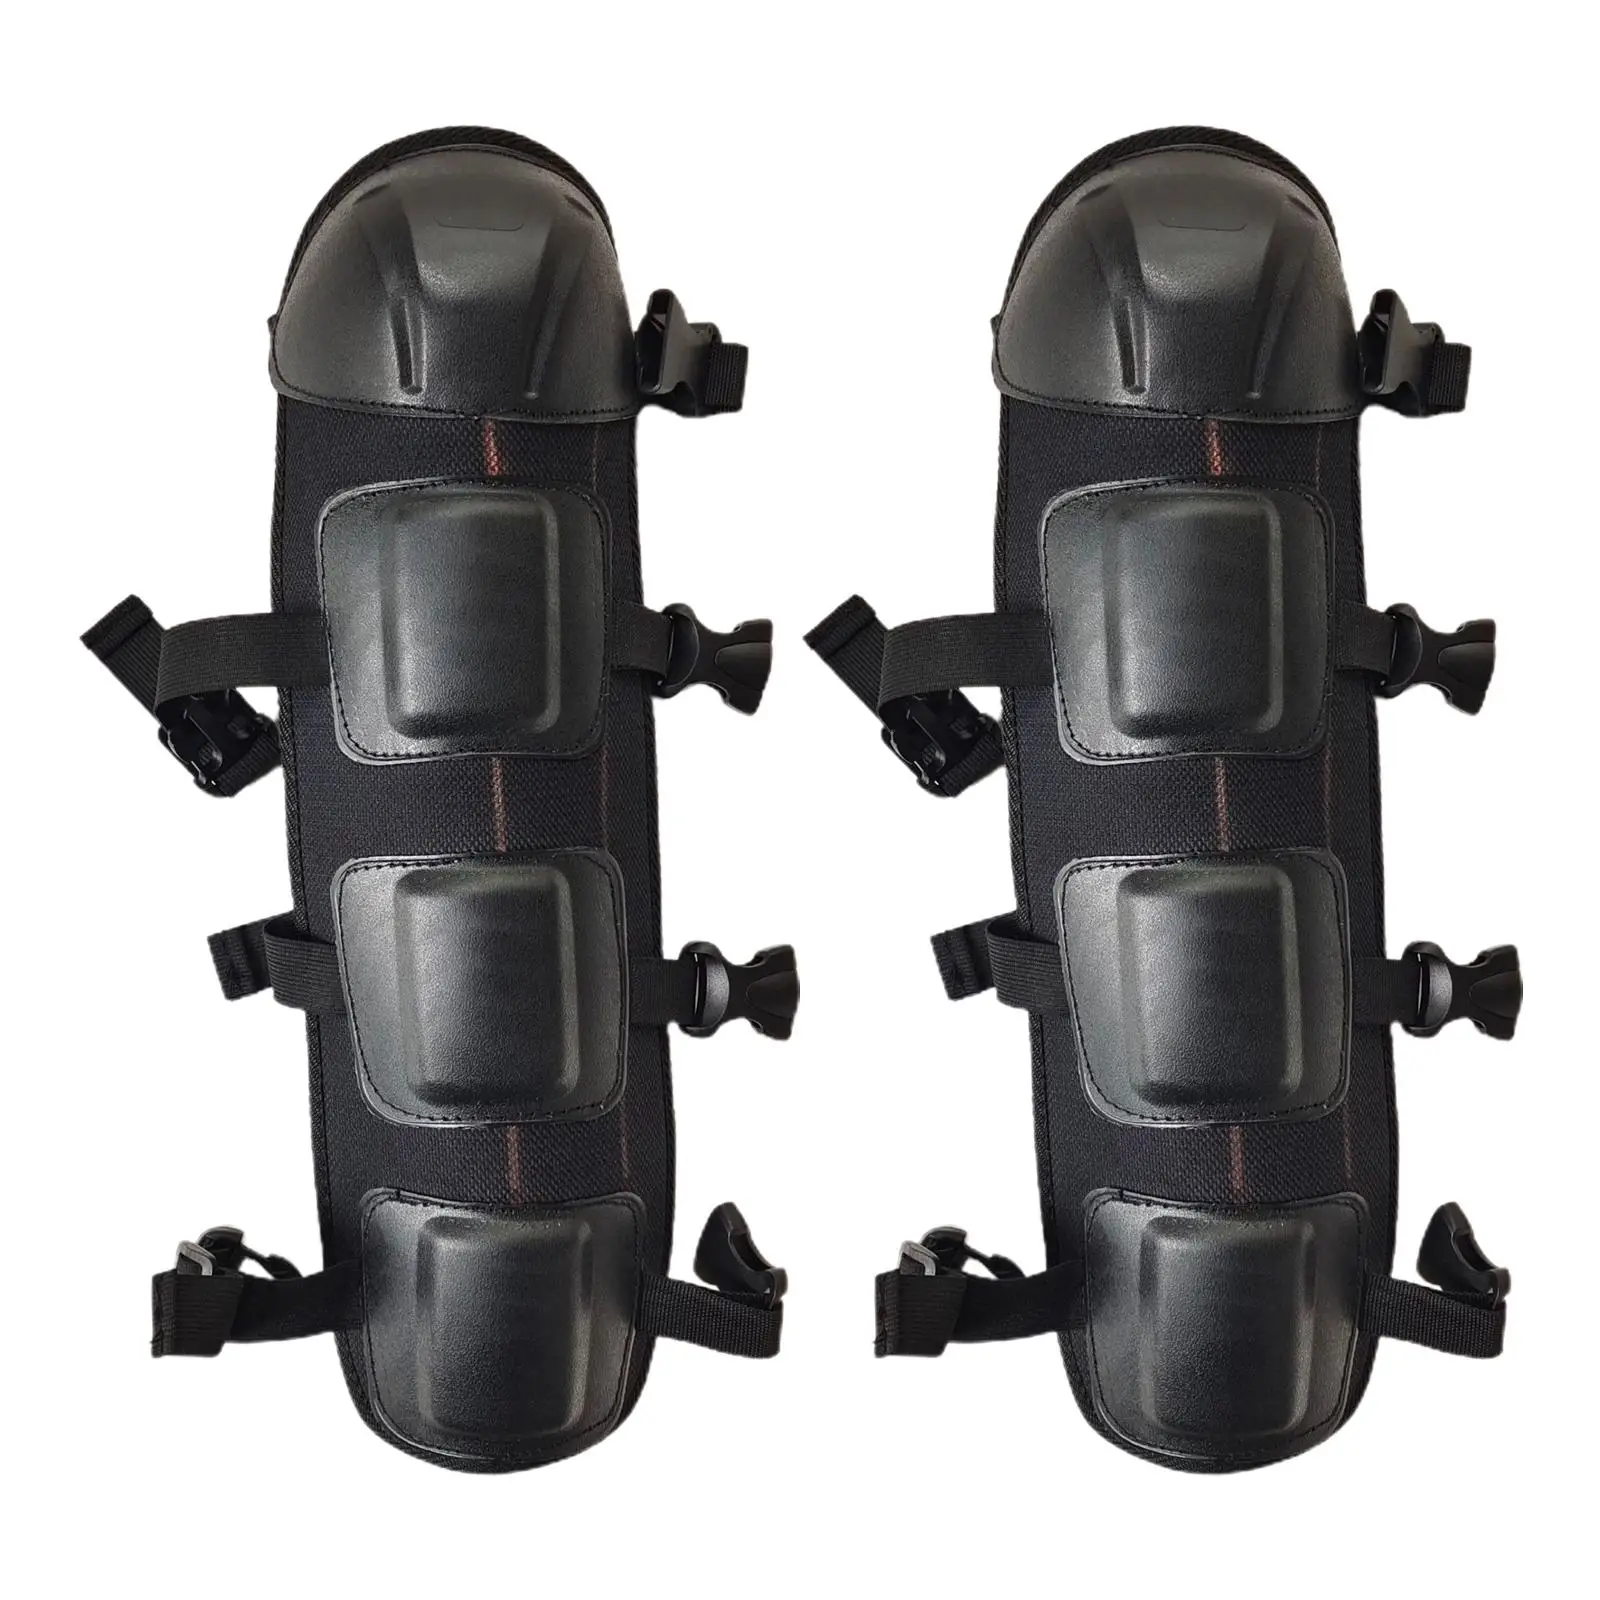 Work Knee Pads Kneelet Protective Gear Soft Leg Protector Chain Saw Shin Guards for Cycling Mountain Bikes Gardening Riding